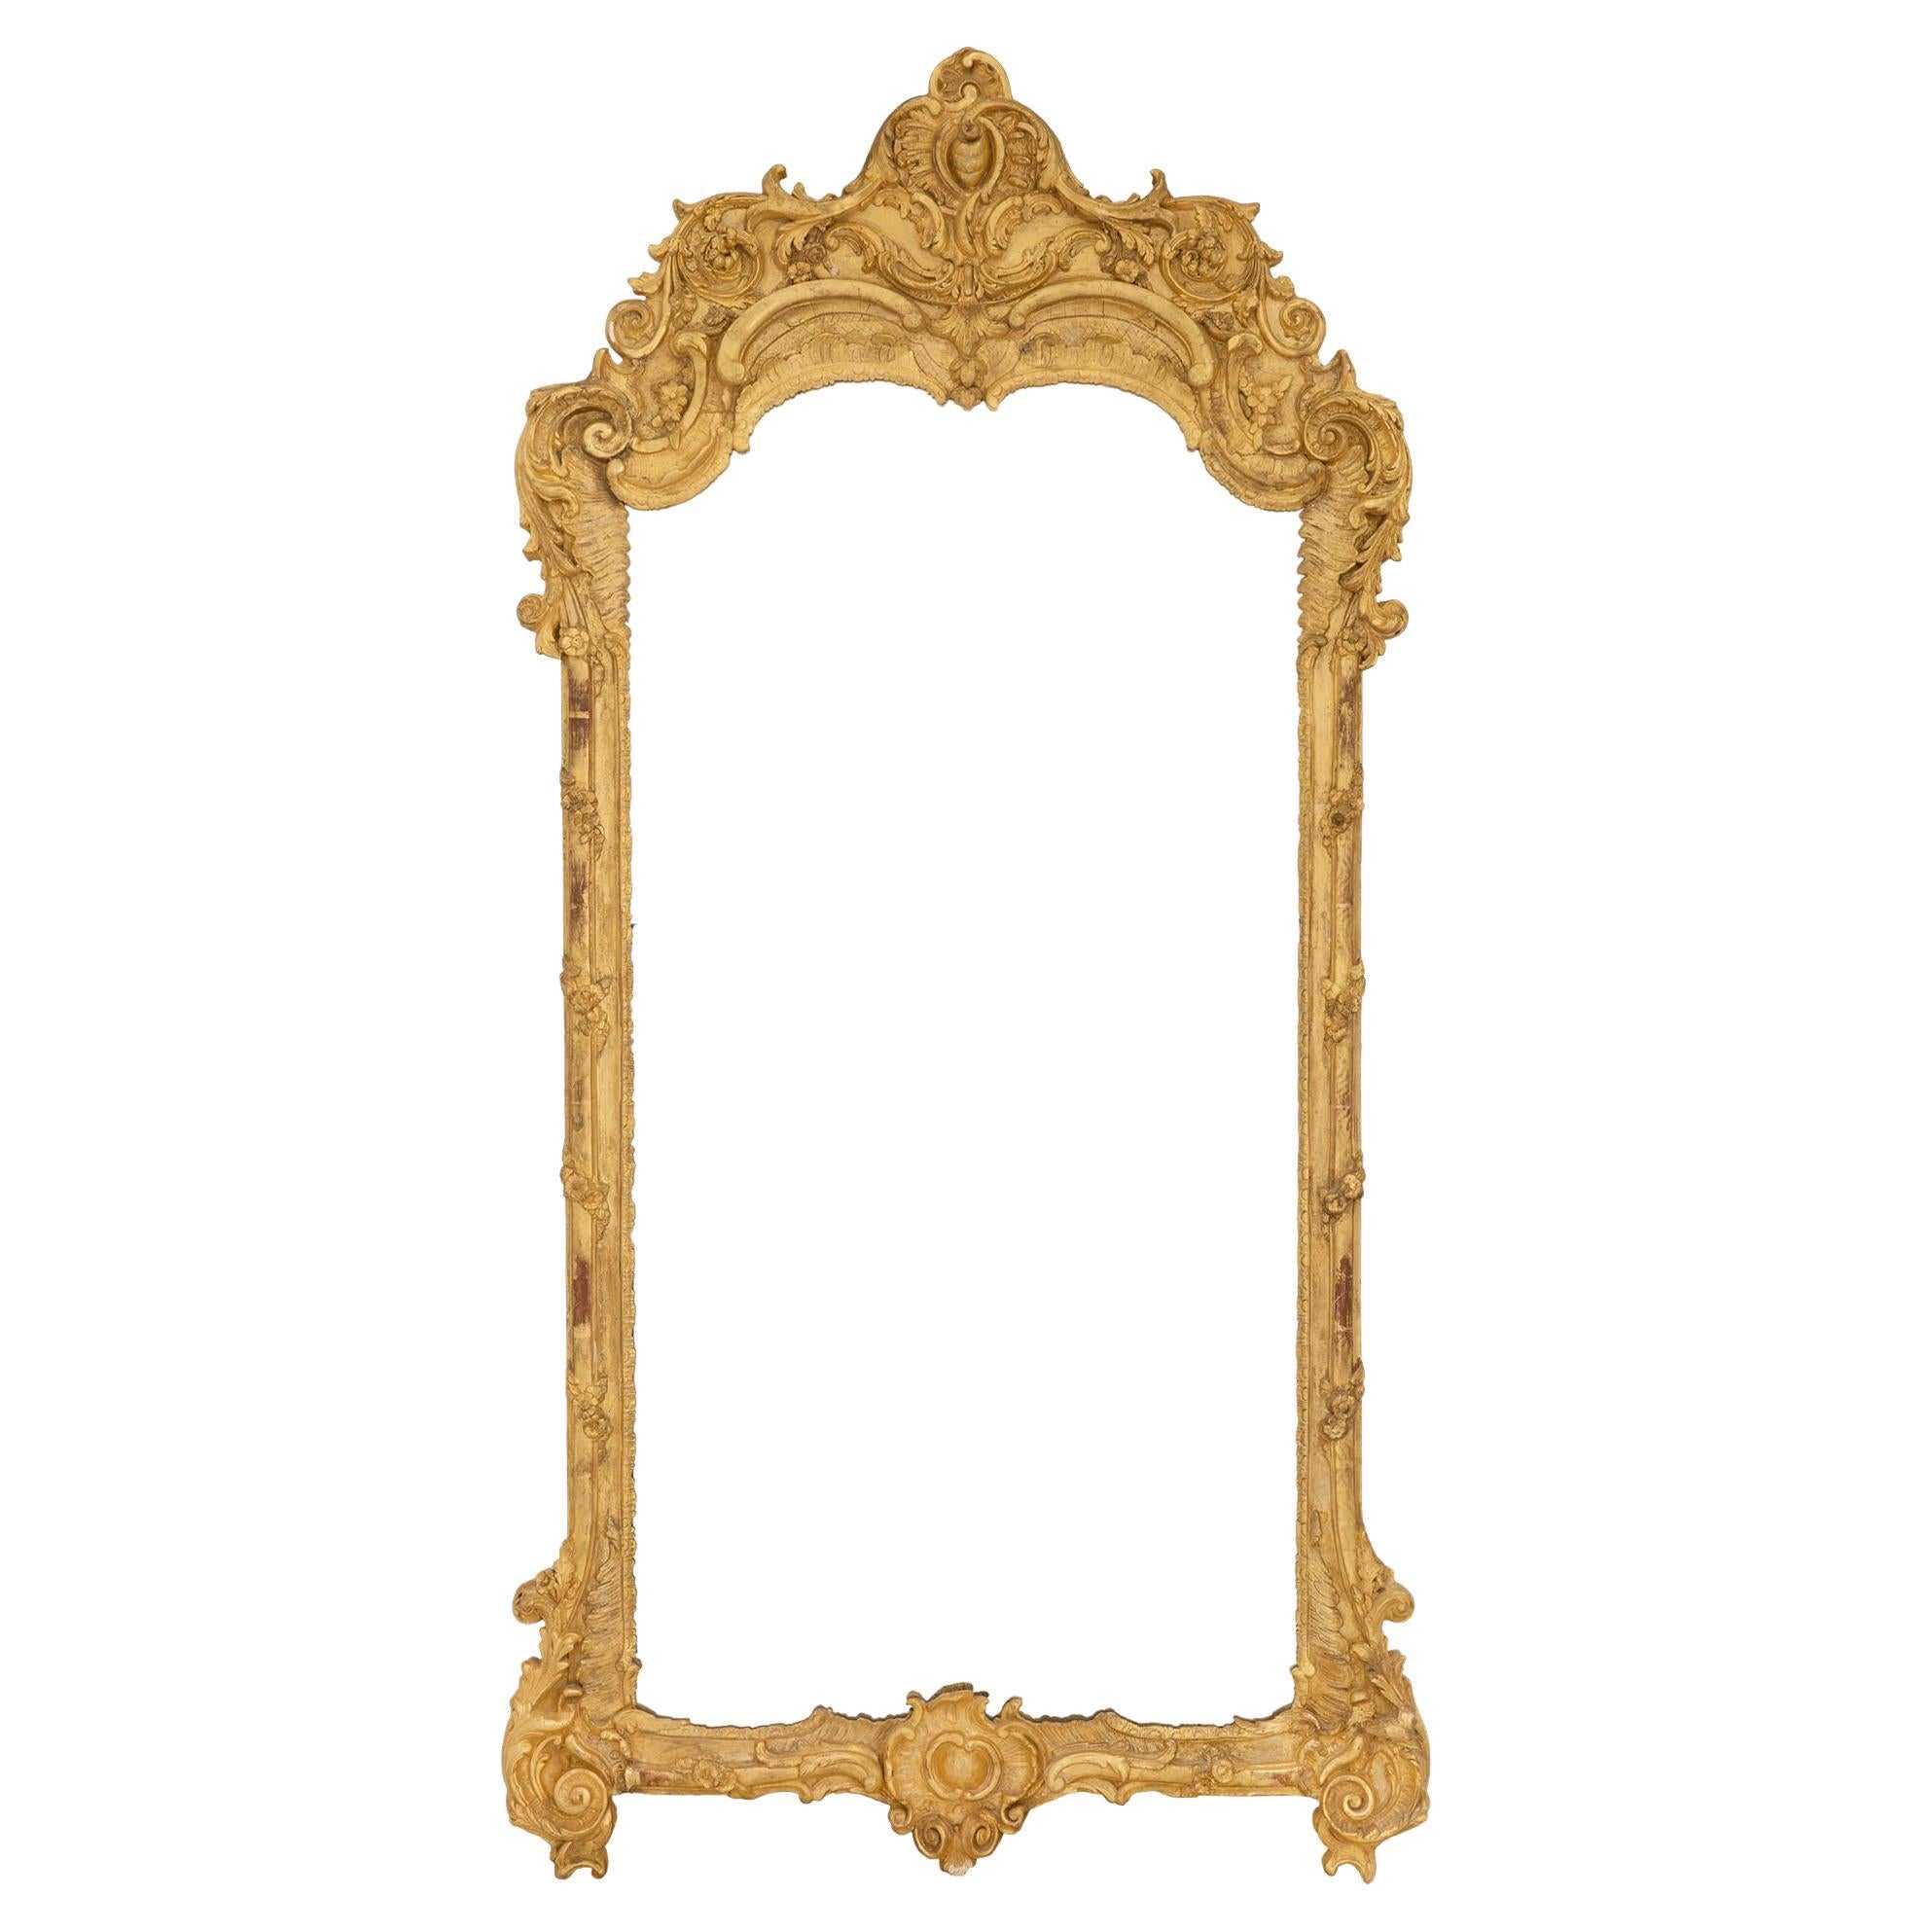 French 18th Century Regence Period Giltwood Mirror